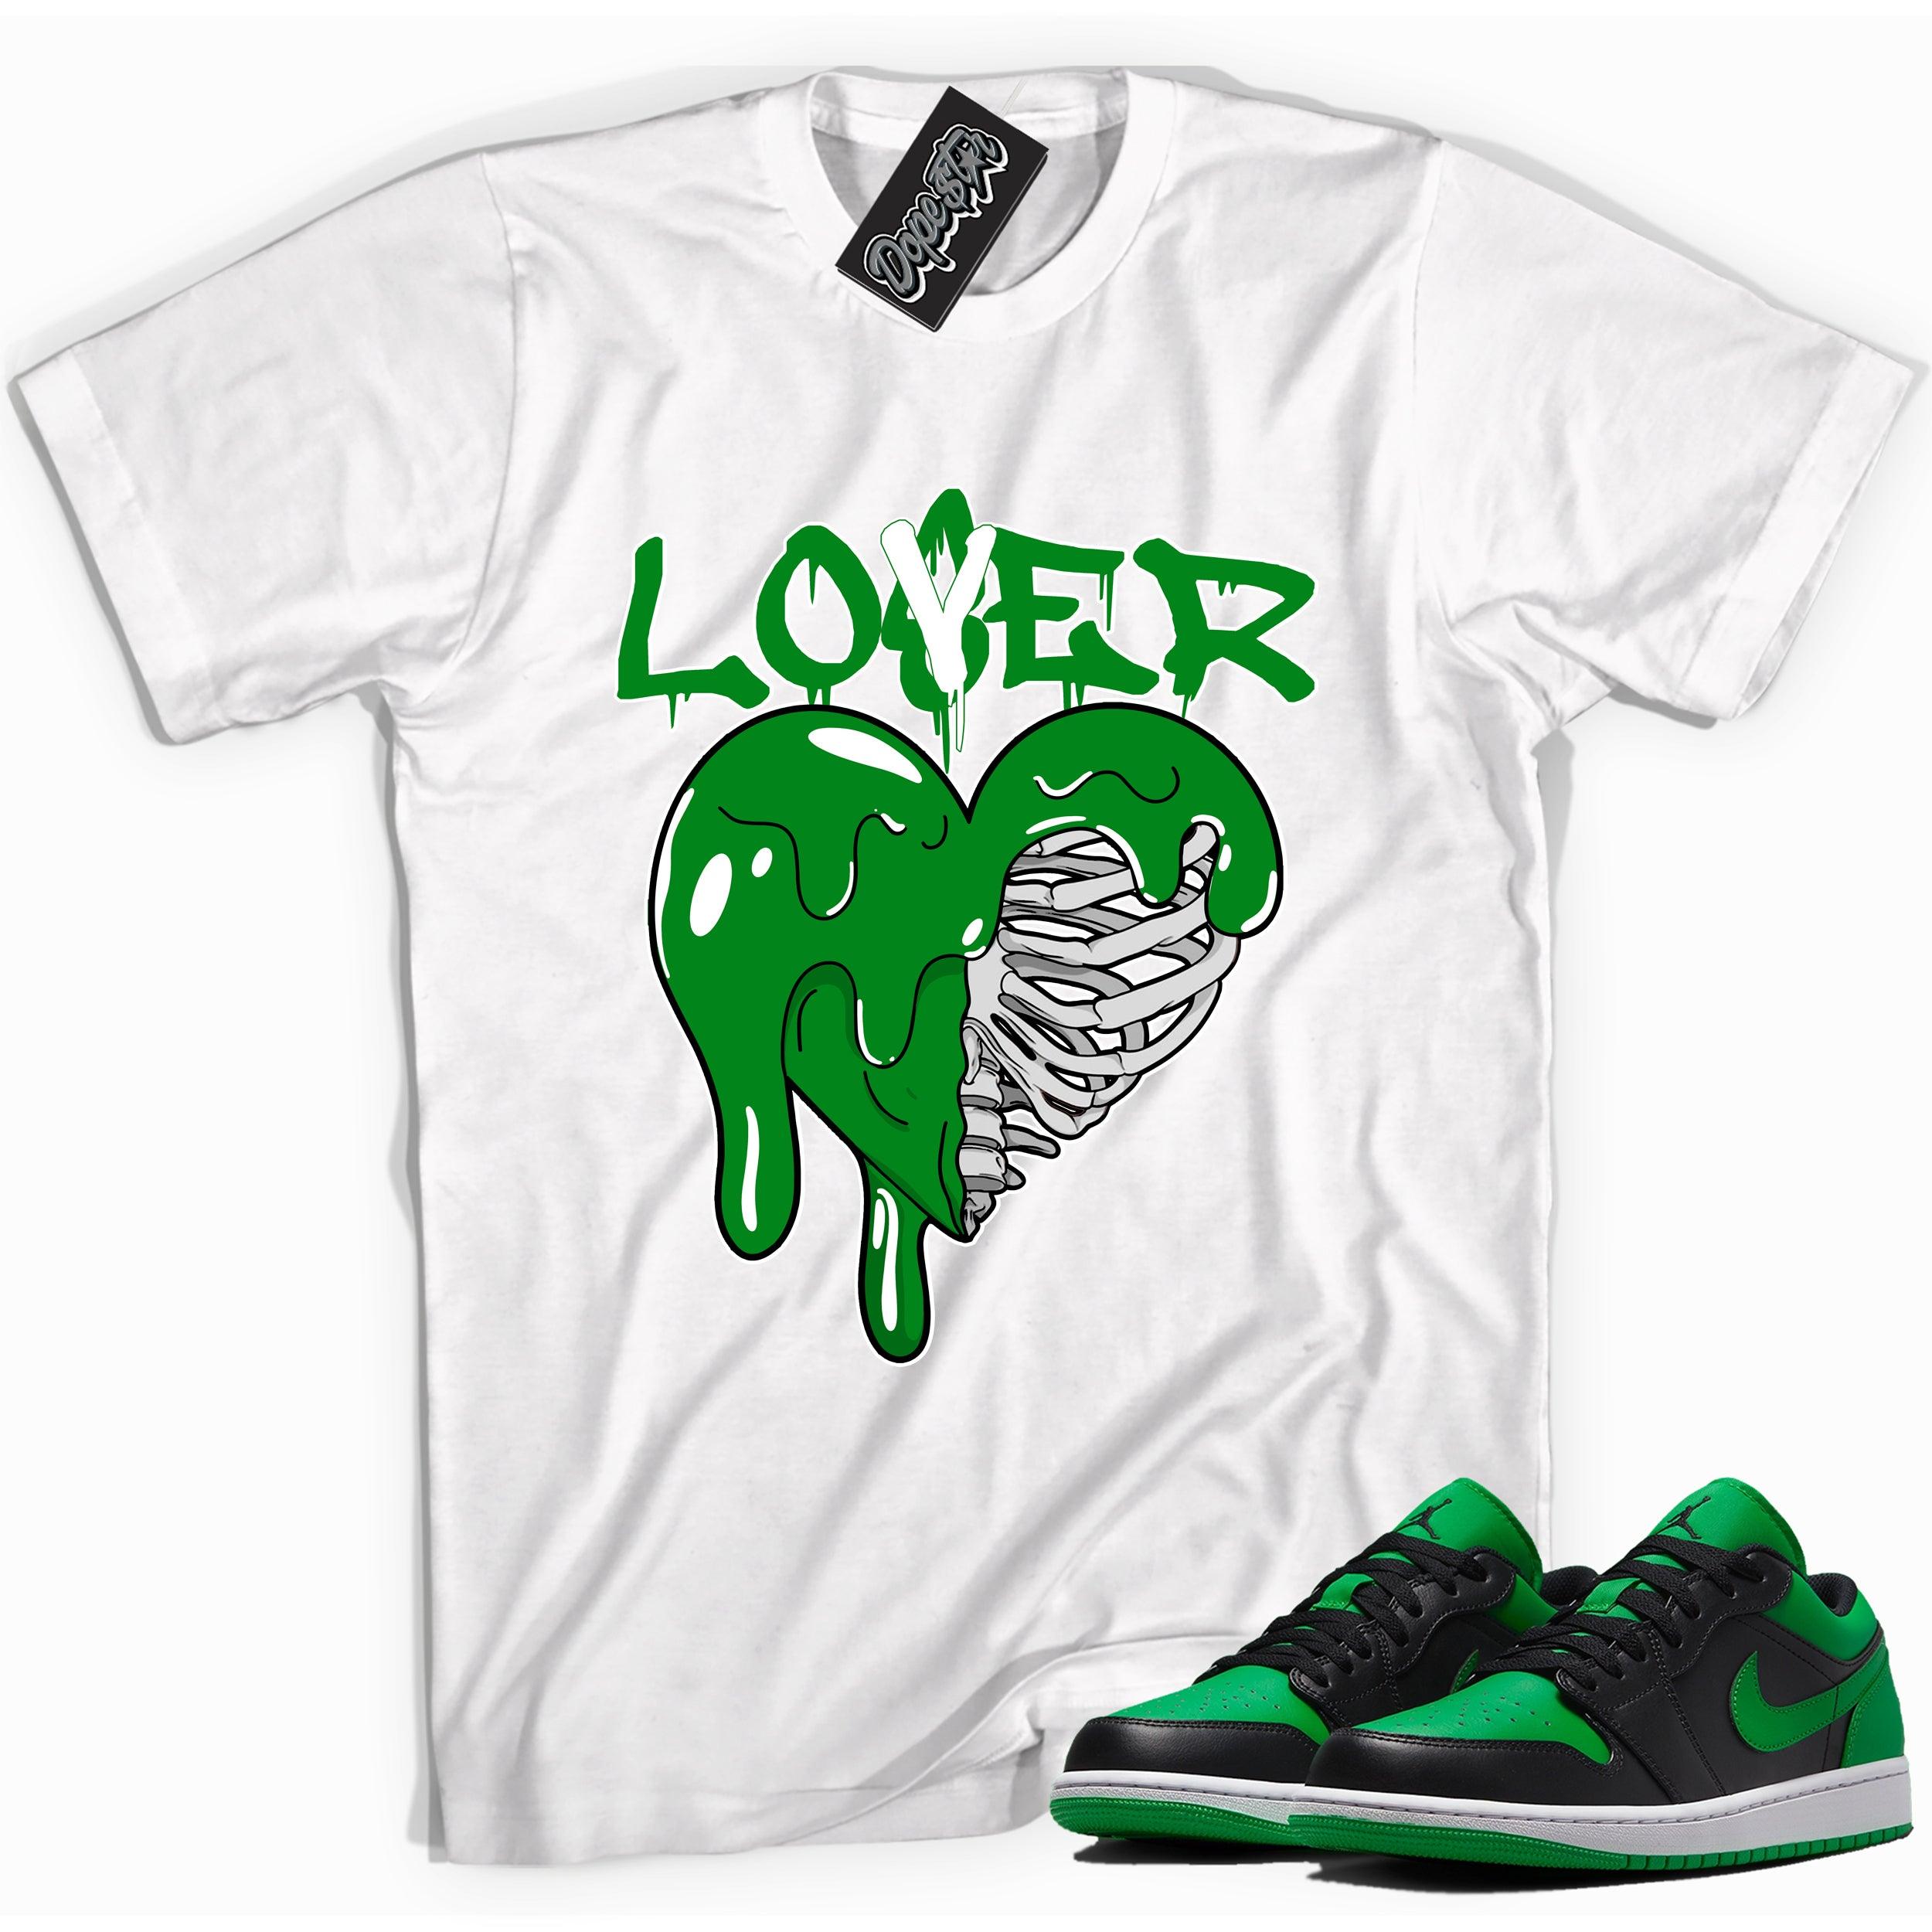 Cool white graphic tee with 'lover/loser' print, that perfectly matches Air Jordan 1 Low Lucky Green sneakers